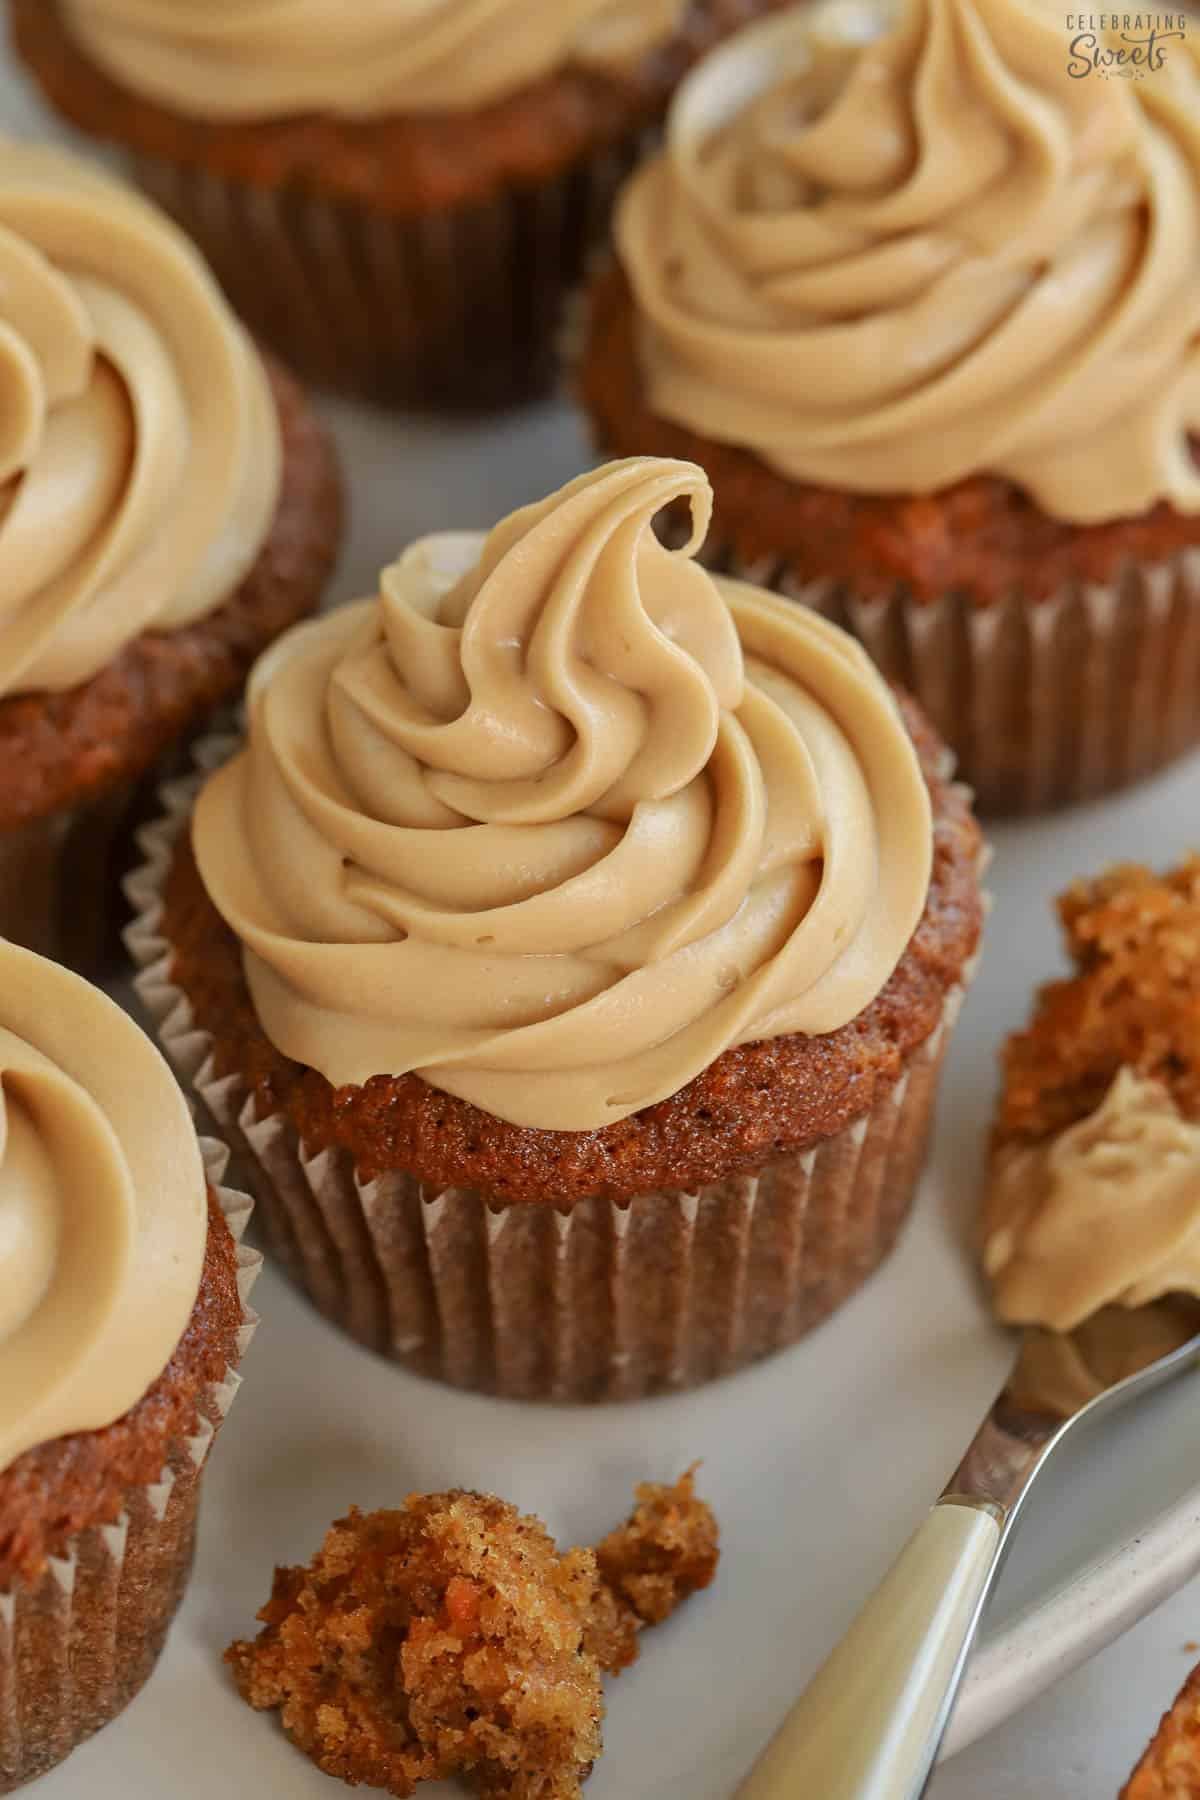 Carrot cake cupcake topped with swirled brown sugar frosting on a grey plate next to a fork.